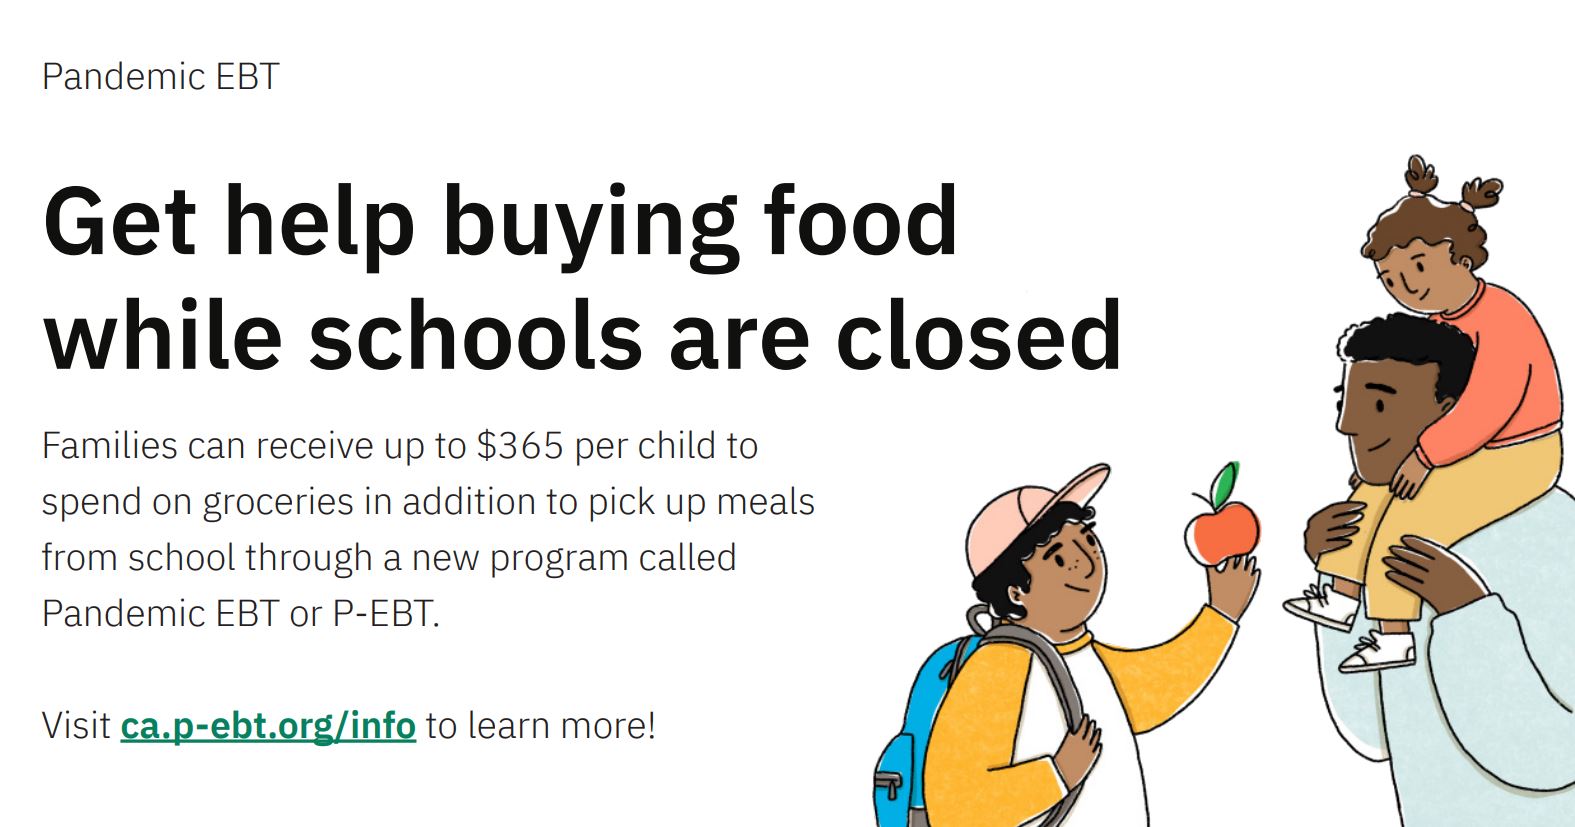 Get help while buying food while schools are closed